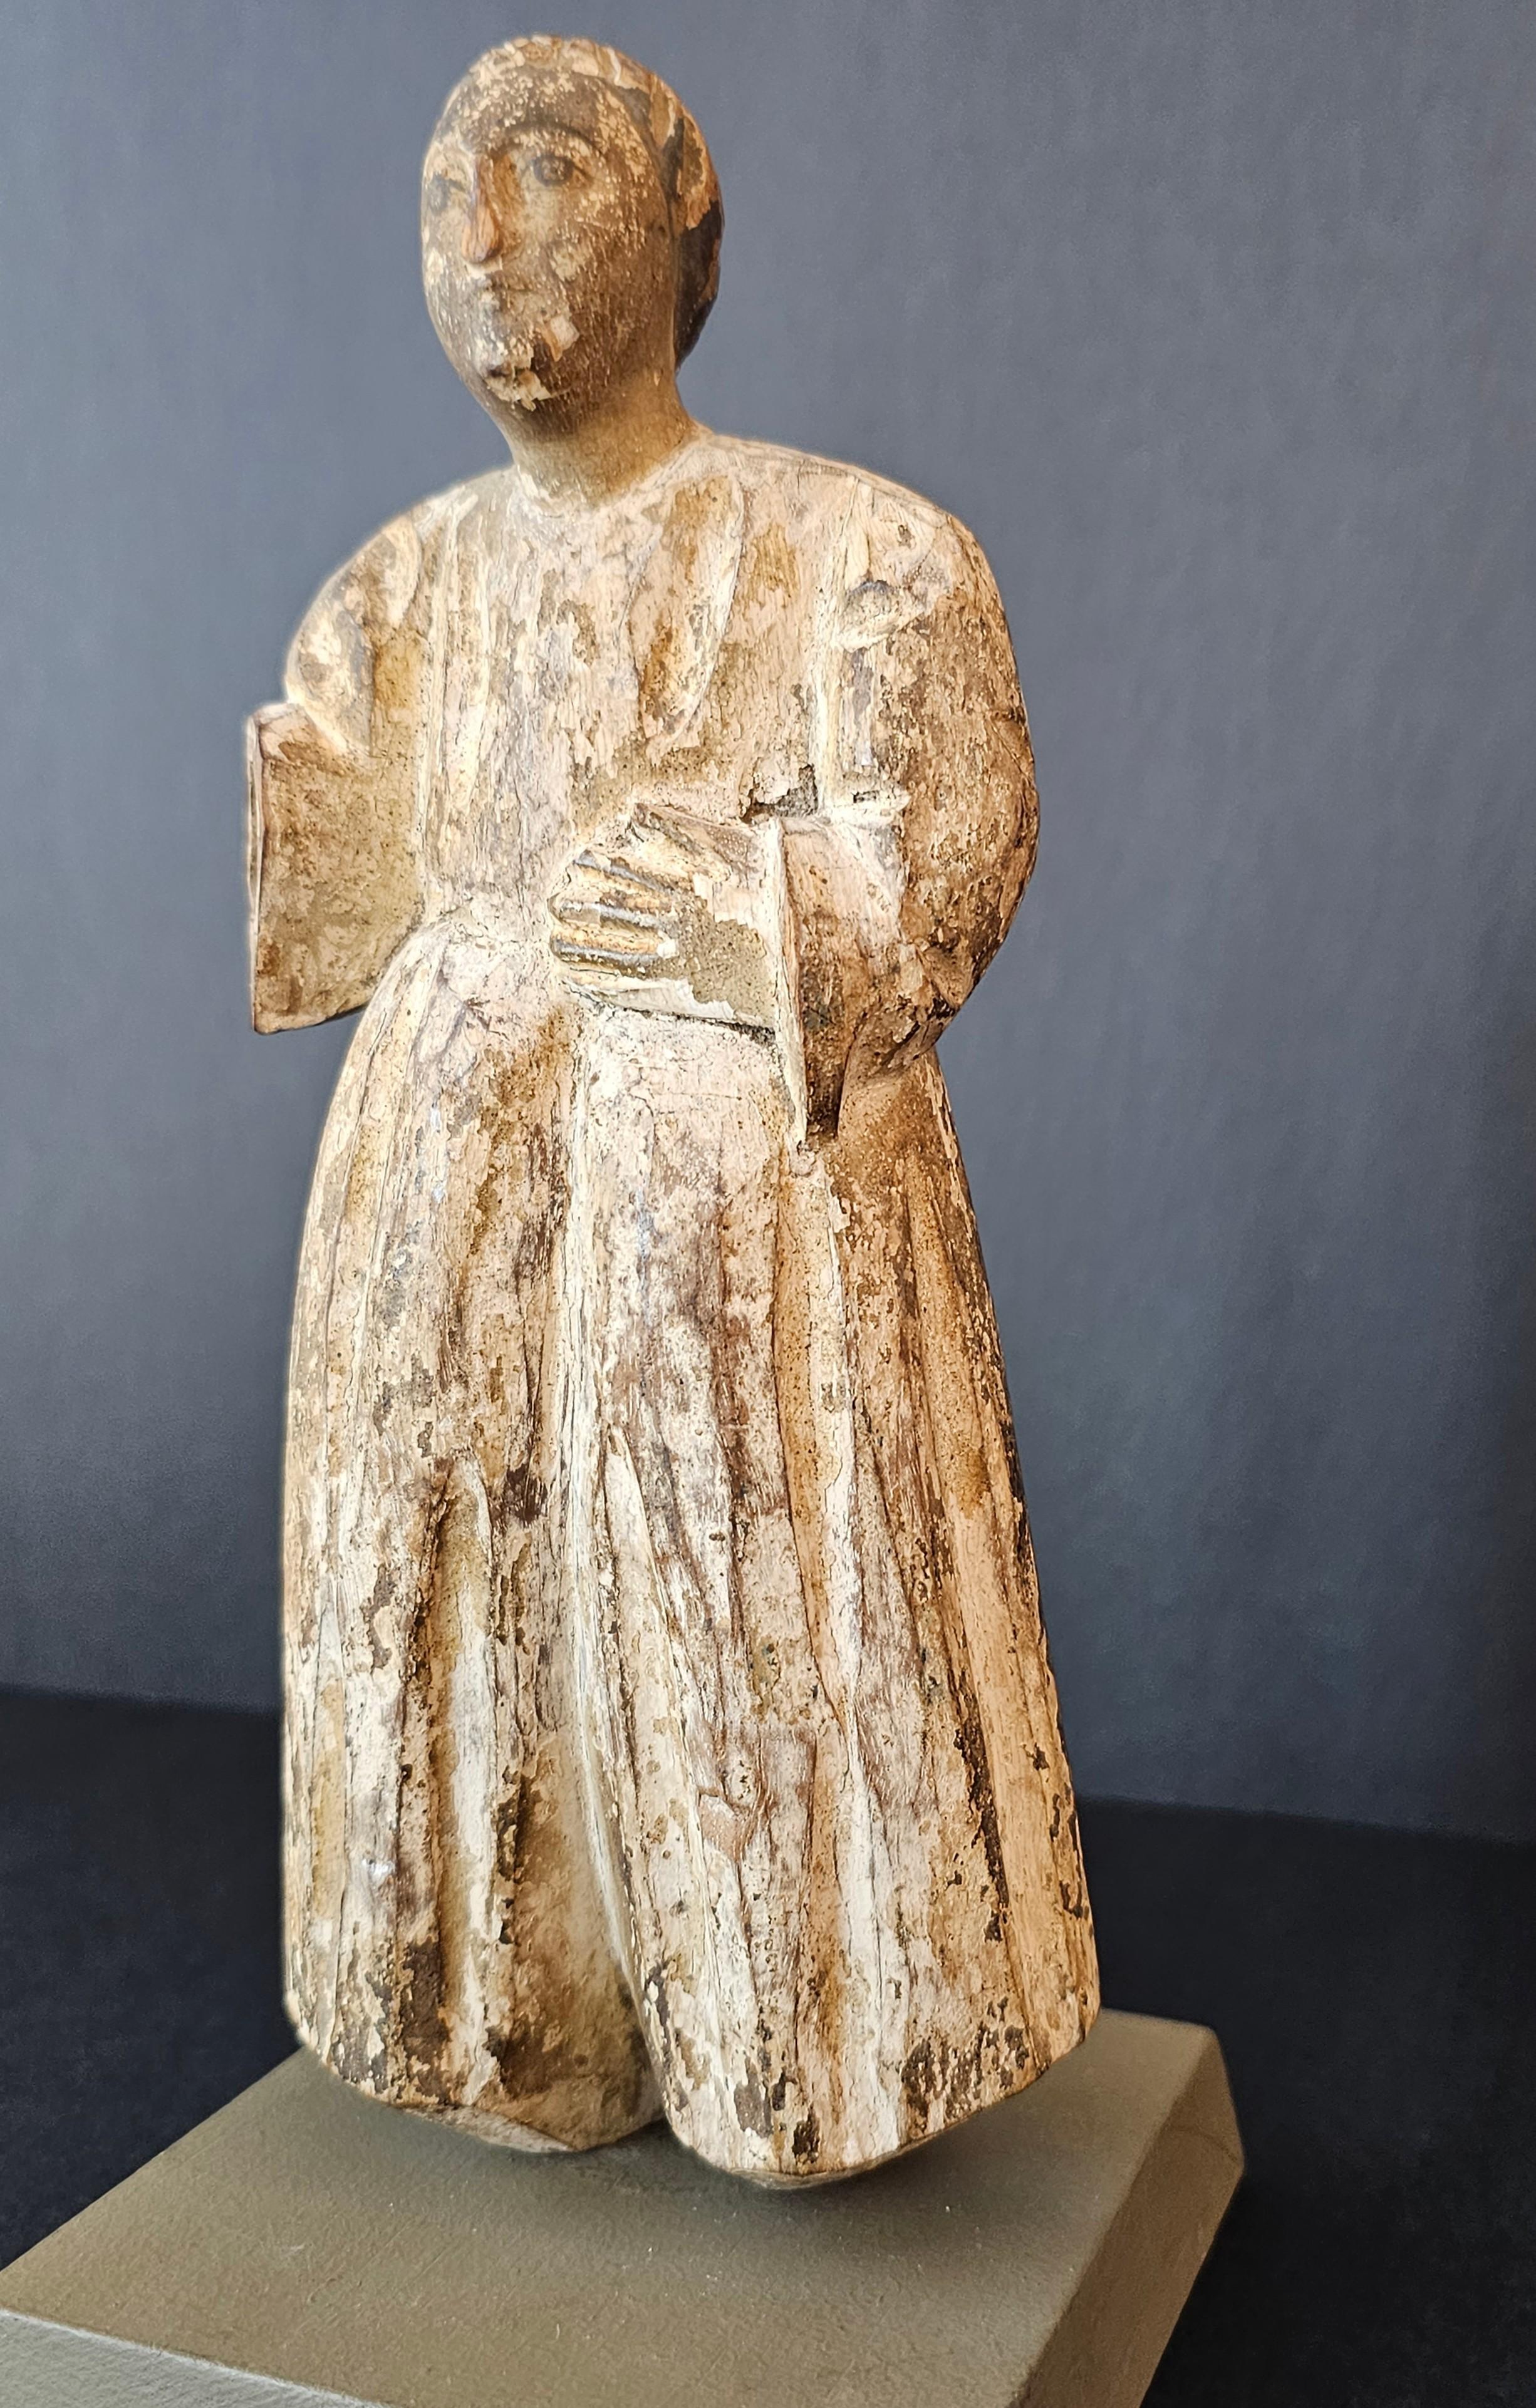 A lovely antique Spanish Colonial hand carved and painted wood santo altar figure - religious folk art sculpture. 

18th/19th century, possibly earlier, most likely depicting Saint Francis of Assisi, figural bulto carving, with finely detailed face,